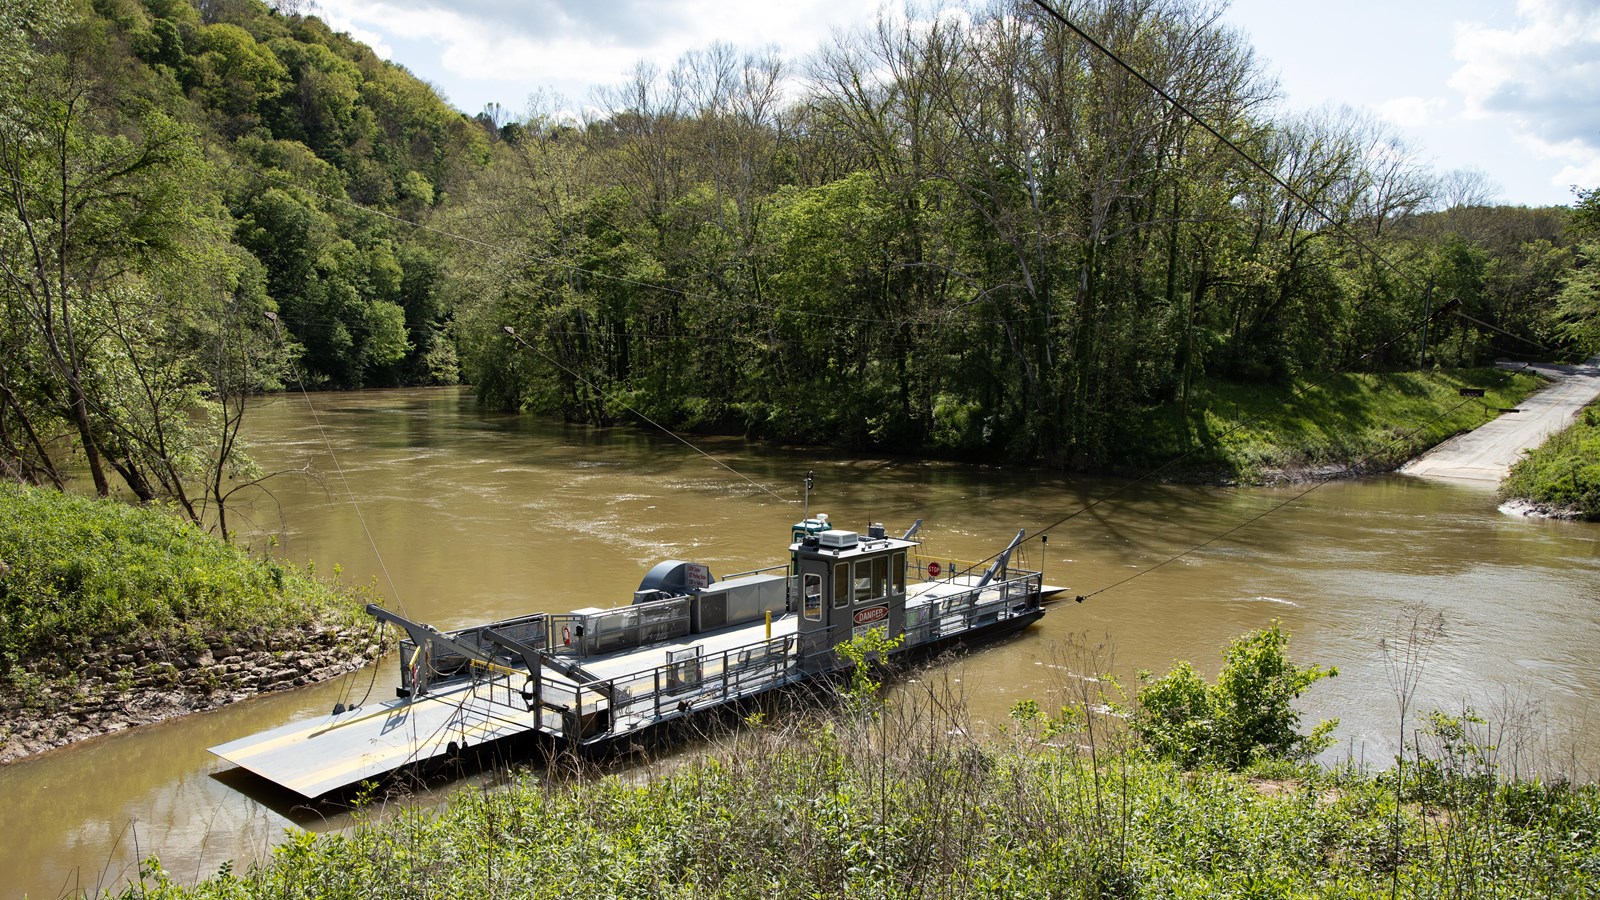 A small vehicle ferry crosses a muddy river. 